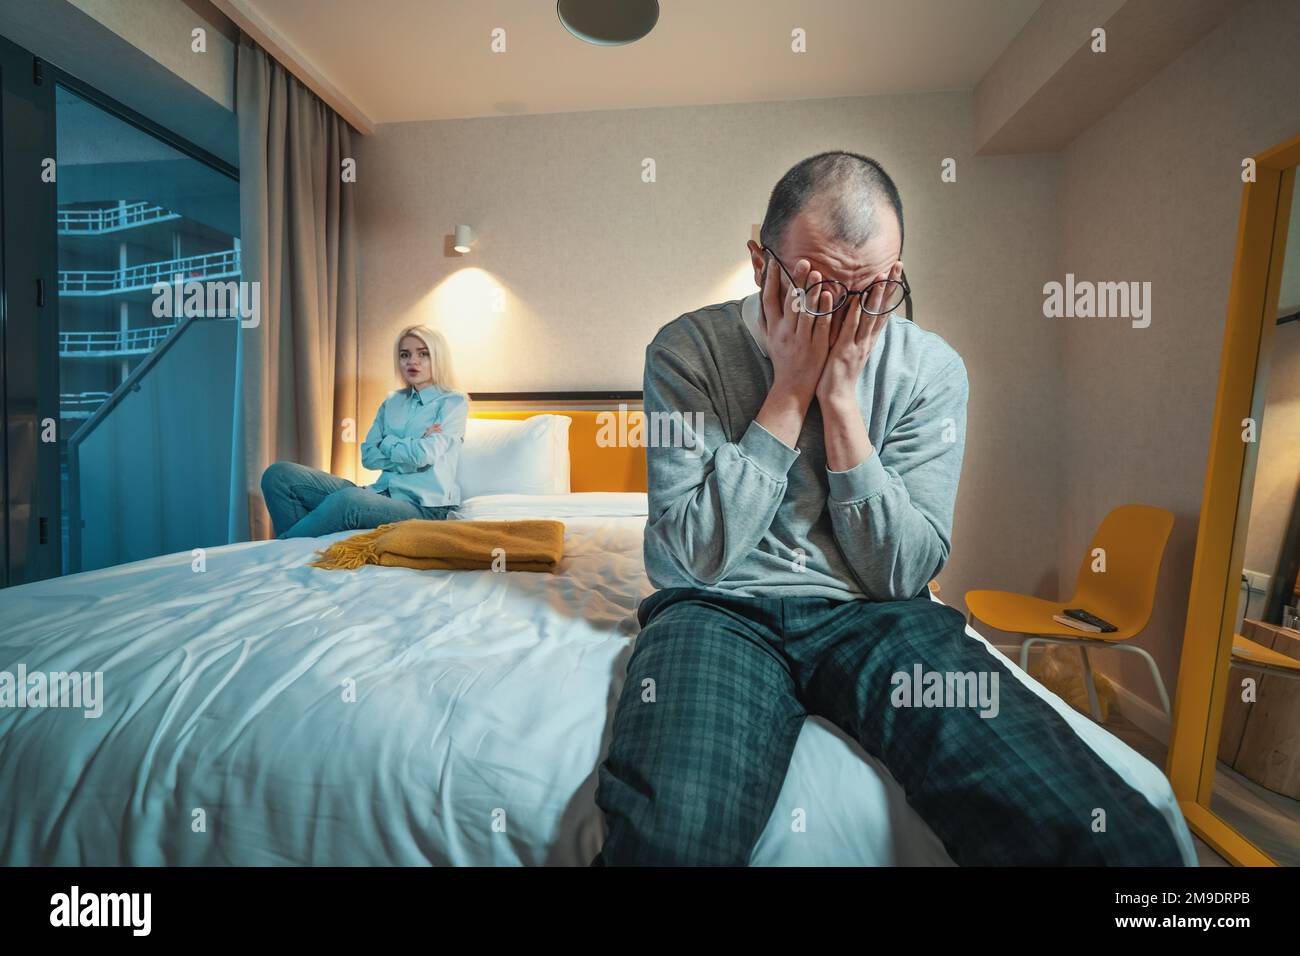 Quarrel of married couple. Man sits on edge of bed and holds his head with hands. Wife or angry girlfriend sitting cross-armed at other end of bed. Problems in relationships. Stock Photo